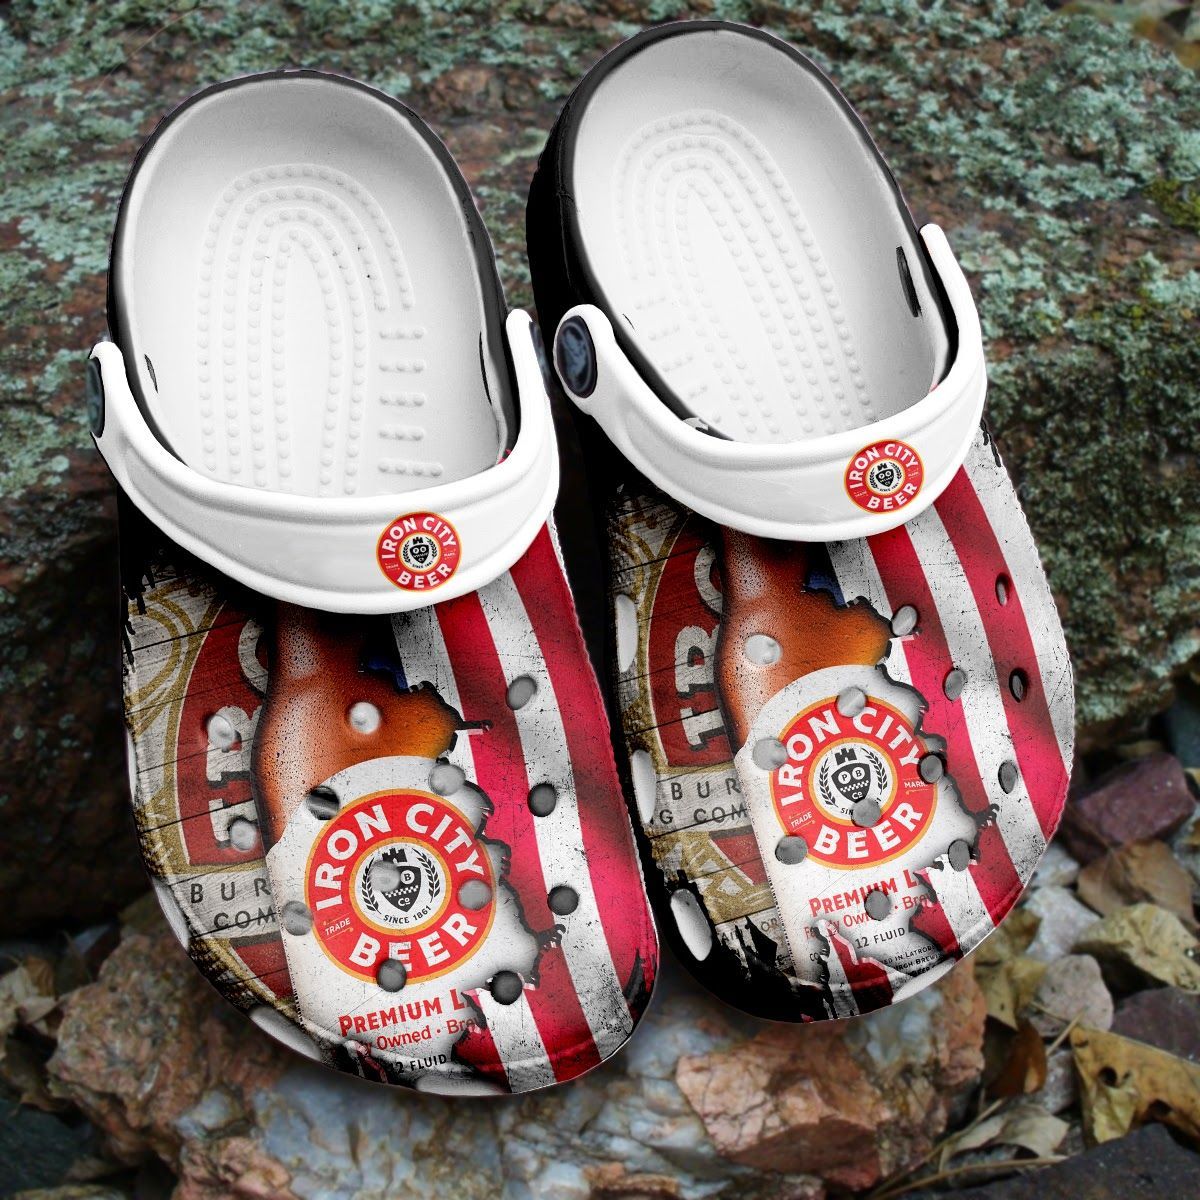 If you'd like to purchase a pair of Crocband Clogs, be sure to check out the official website. 97